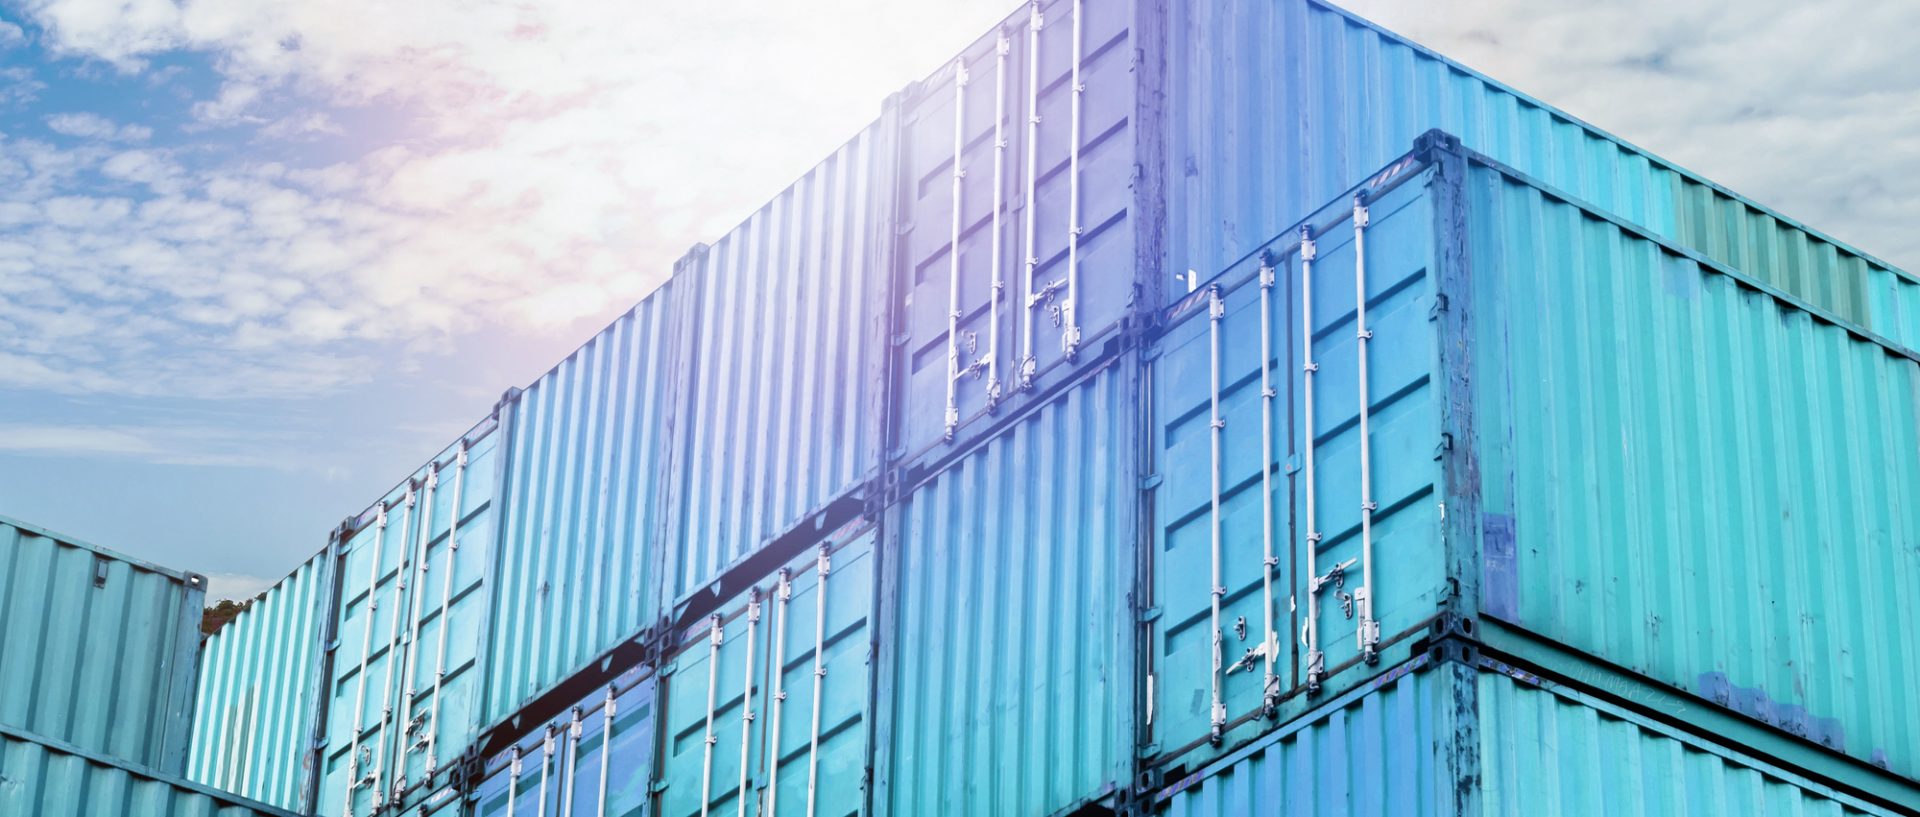 Containers in Ocean Freight